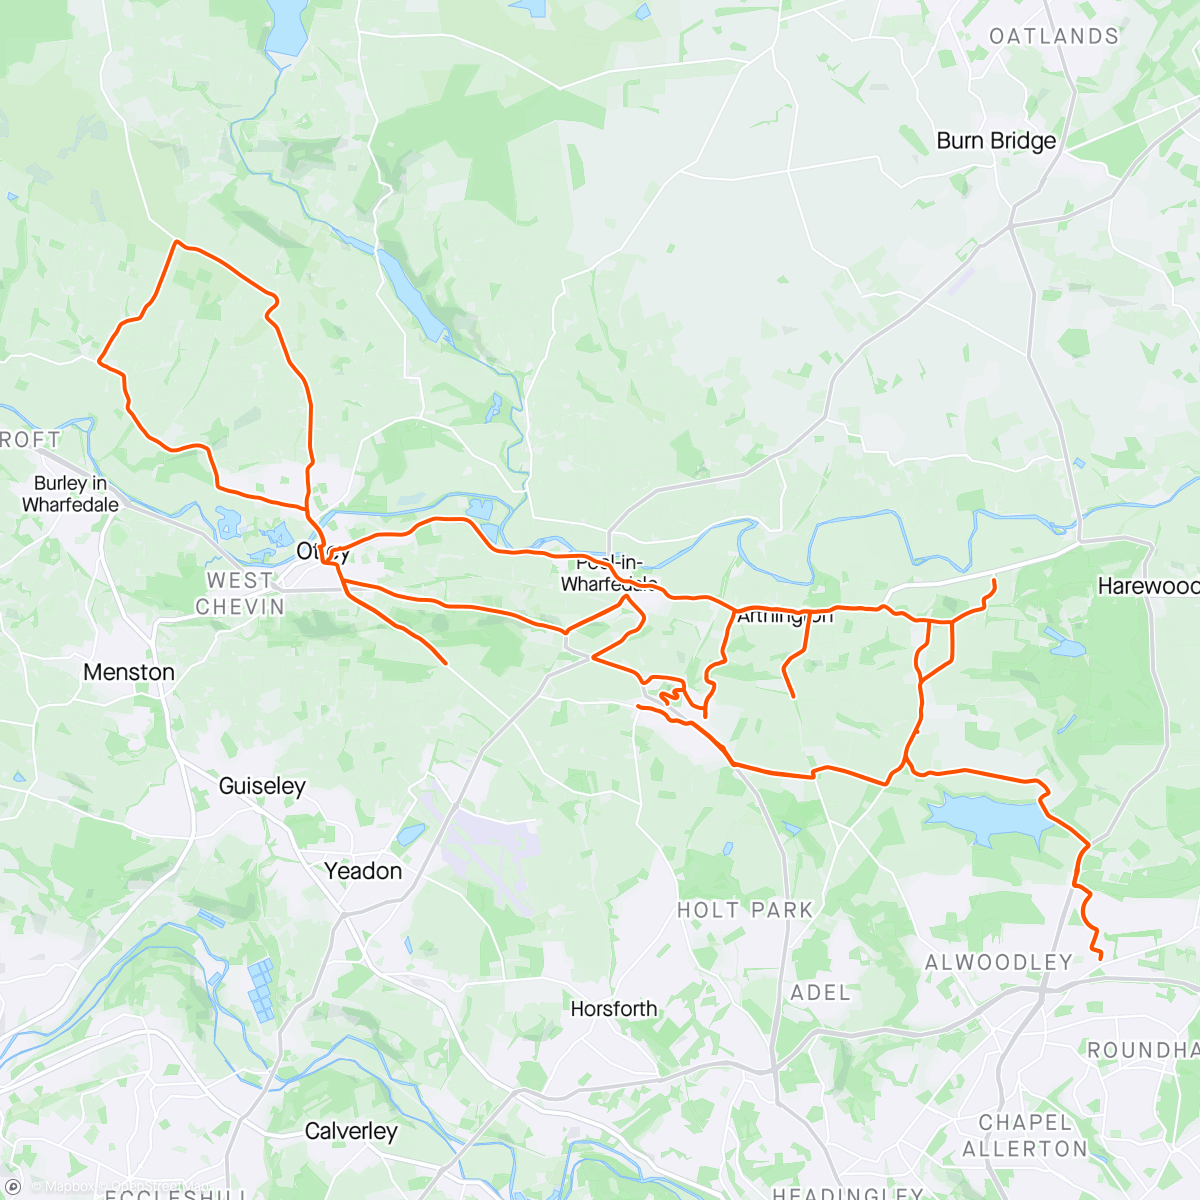 Map of the activity, Brutal hill repeats - 2x weardley, 2x black hill, 2x Crekseld, 2x hall rise, 1x hall drive, 2x old pool bank, 1x east chevin, 1x newall carr lane. I think that’s the lot - knackered 🥵